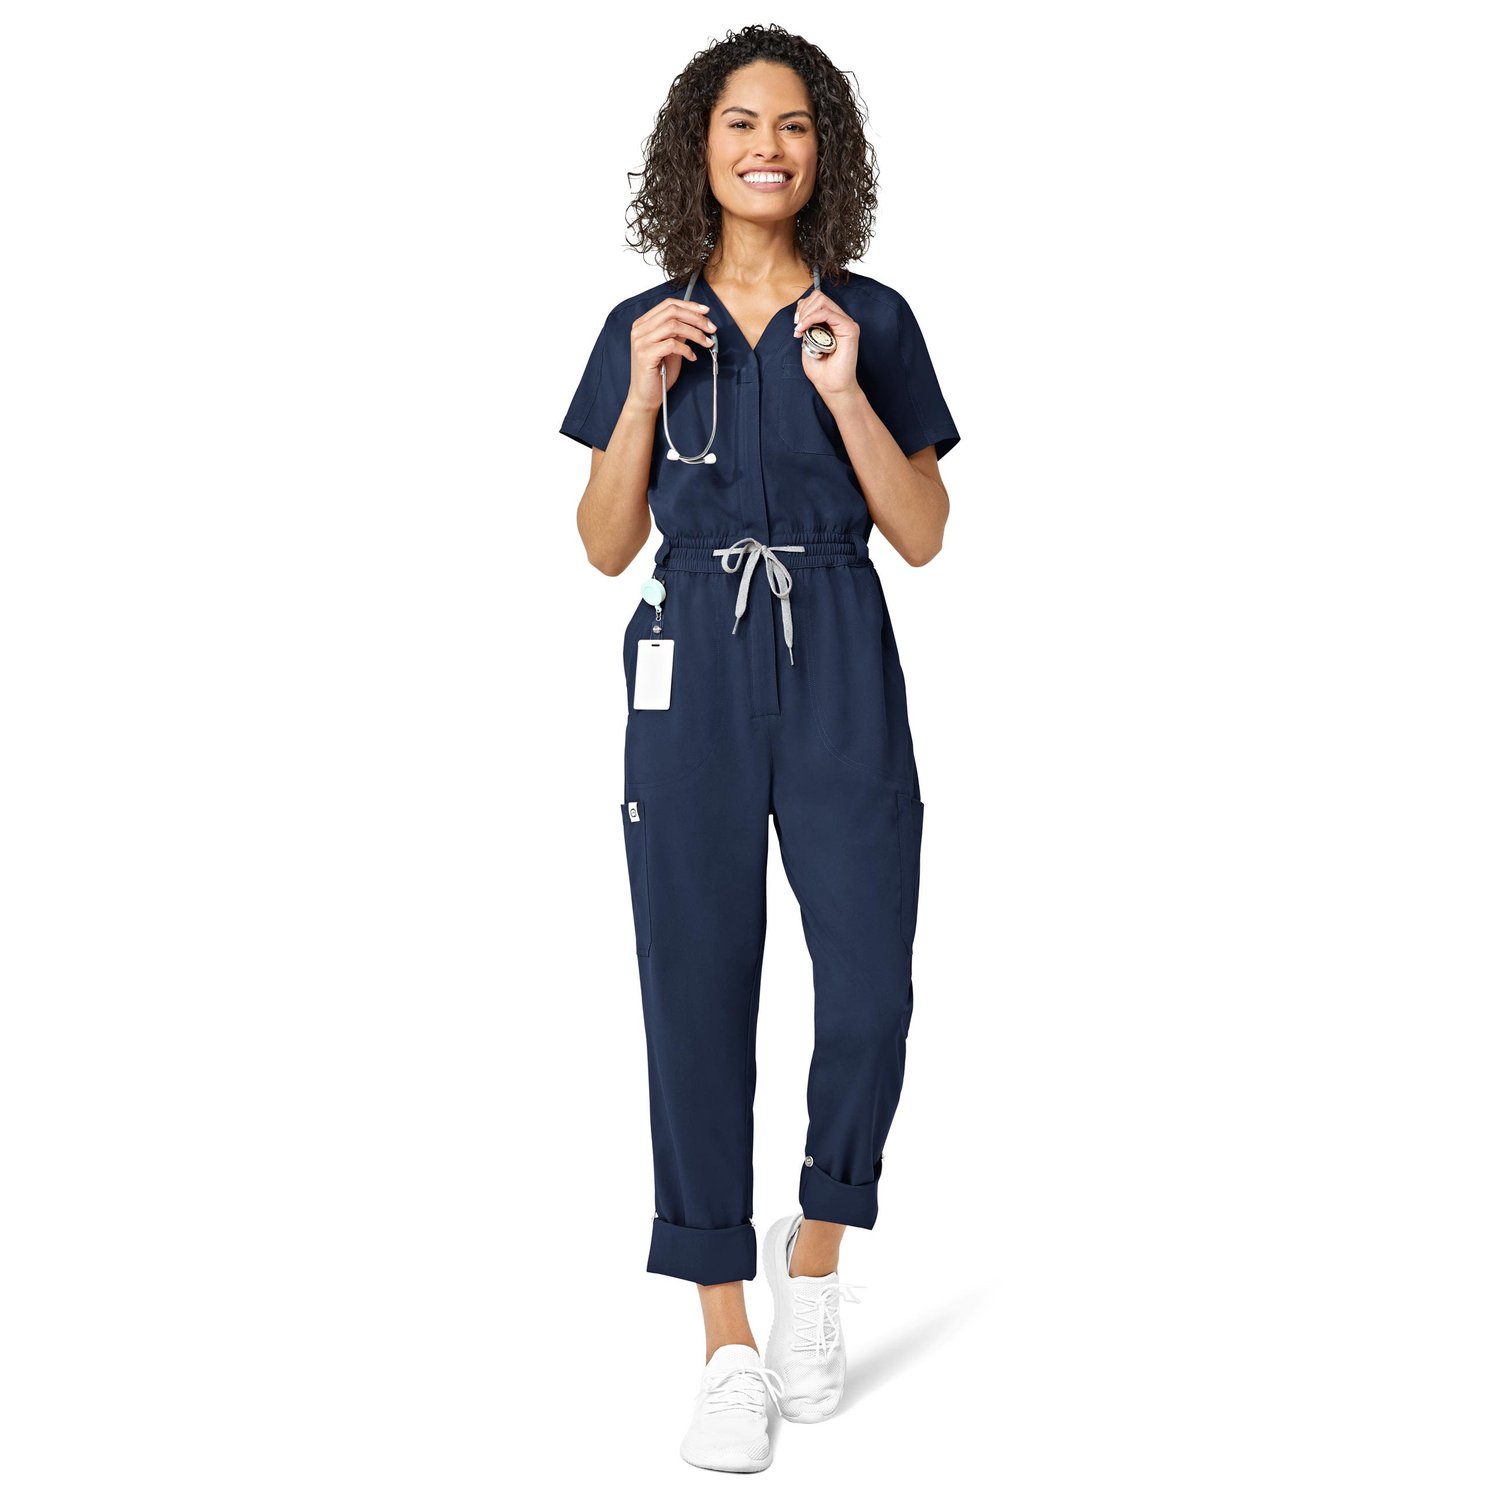 Wink Zip Front Jumpsuit - Women's Scrub Collections - Lifestyle ...